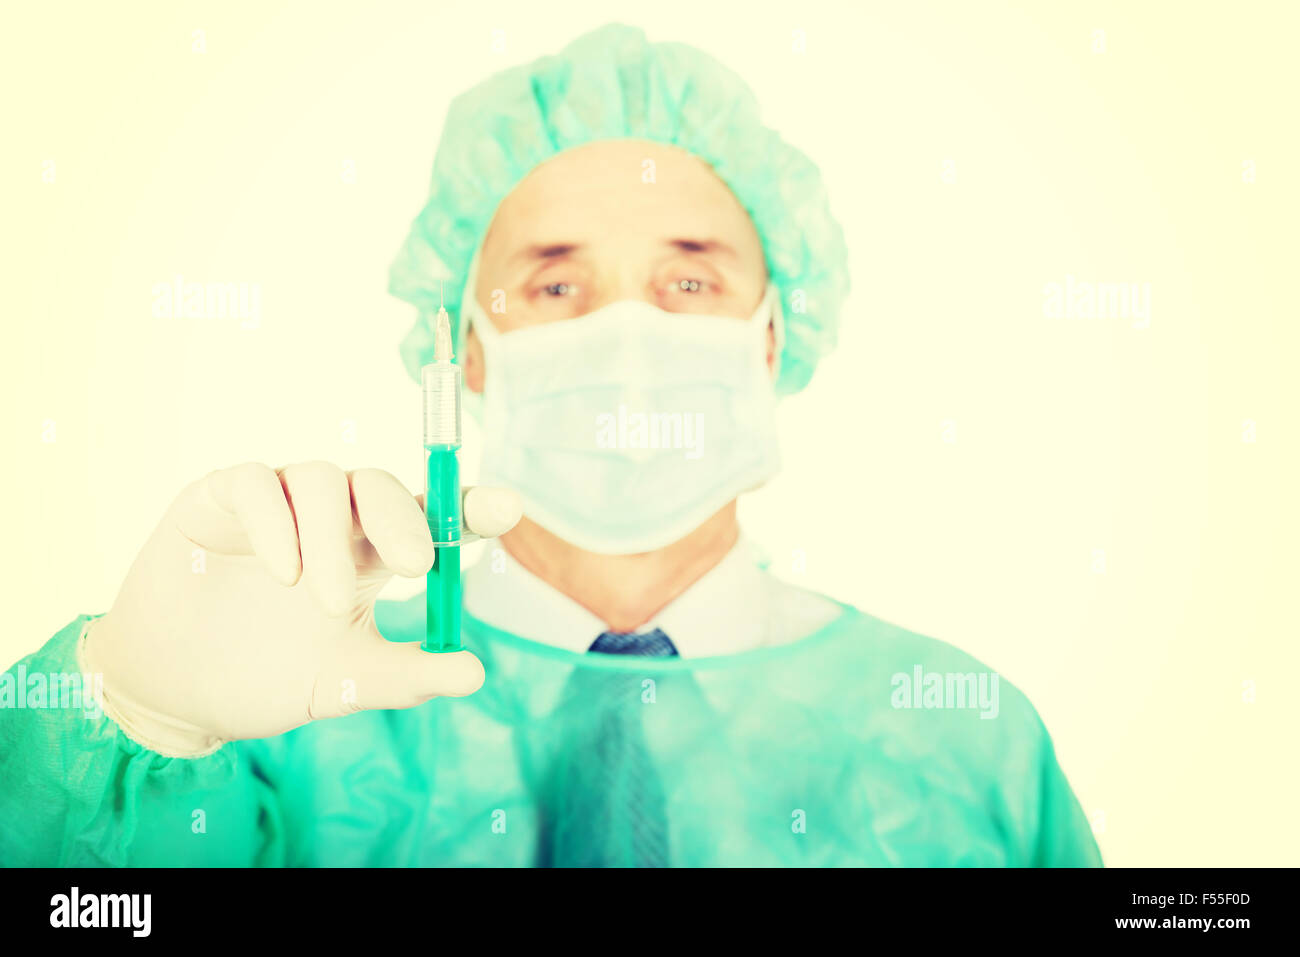 Surgeon Holding A Scringe Menacingly High-Res Stock Photo - Getty Images